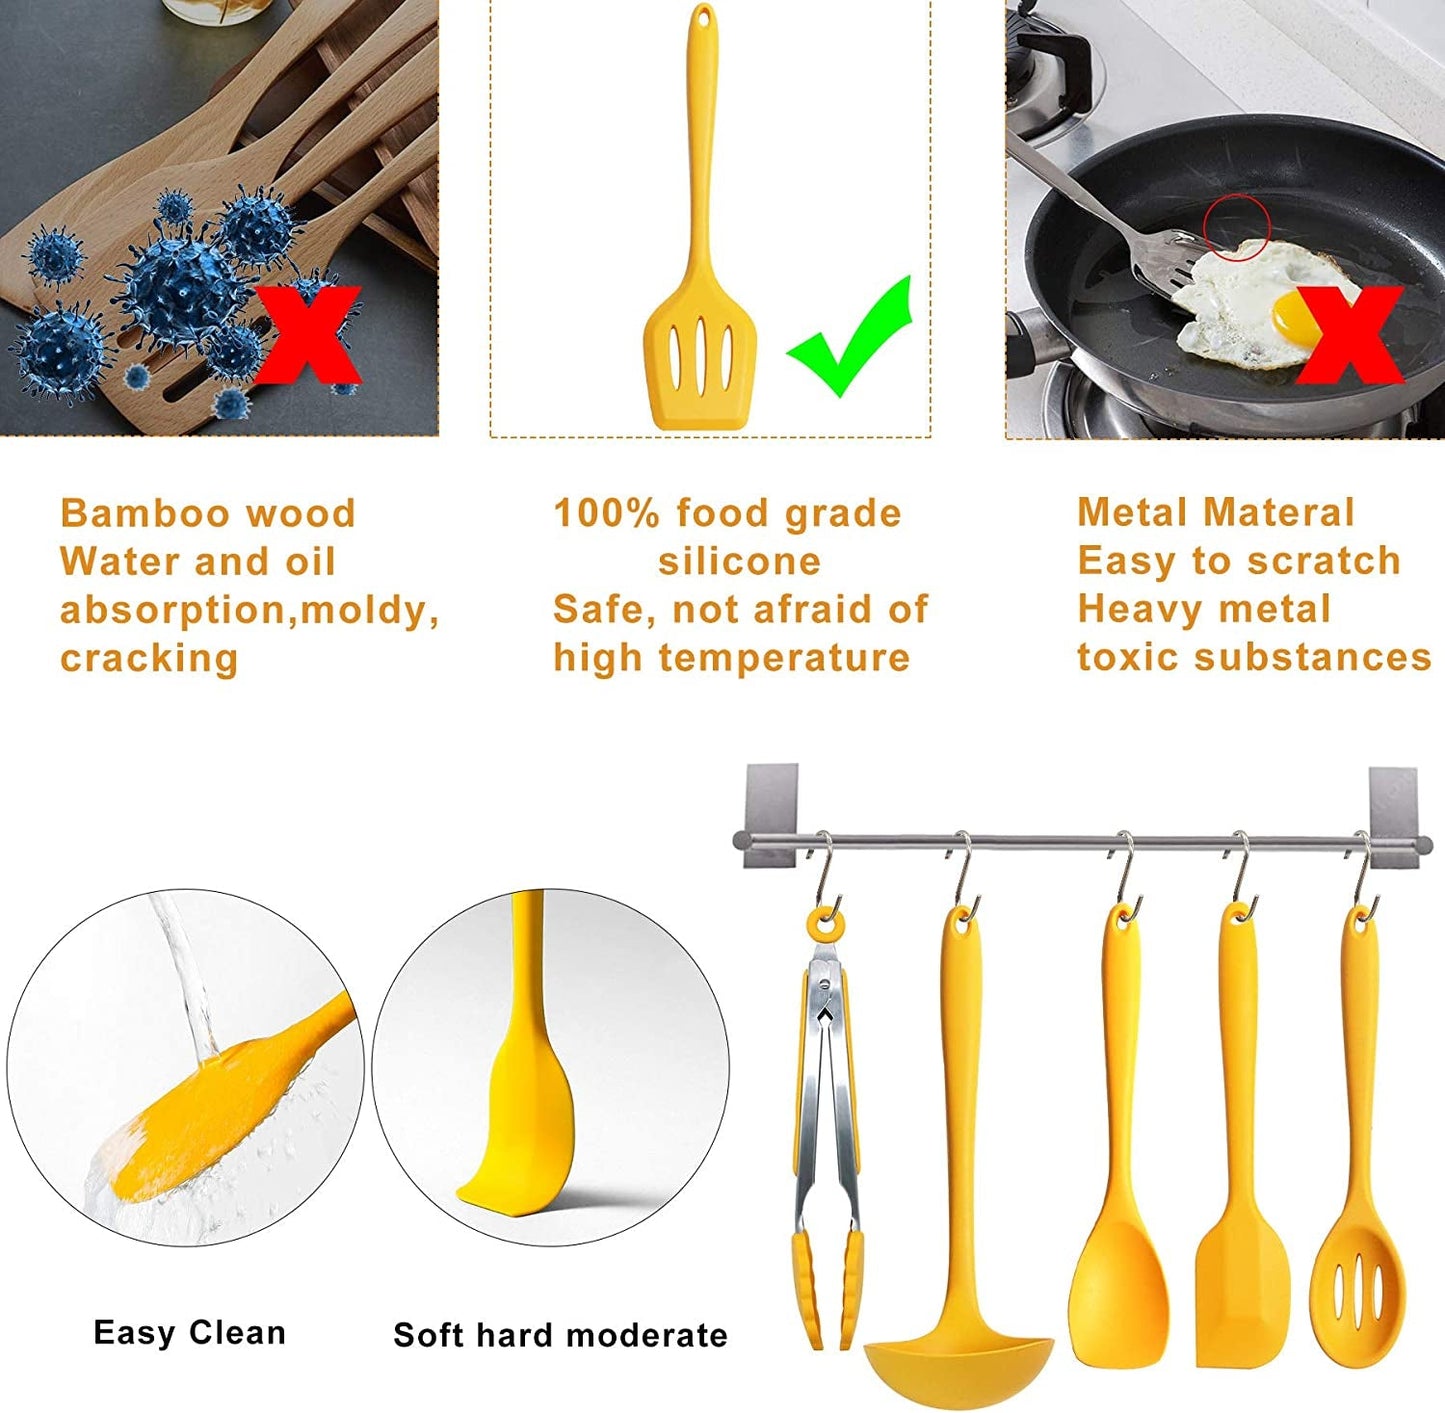 Kitchen Utensil Set - 14Pcs Silicone Cooking Utensils Set, Silicone Kitchen Utensils, Cooking Tools Turner Tongs Nonstick Spatula Spoon for Nonstick Heat Resistant Cookware - FoxMart™️ - FoxMart™️